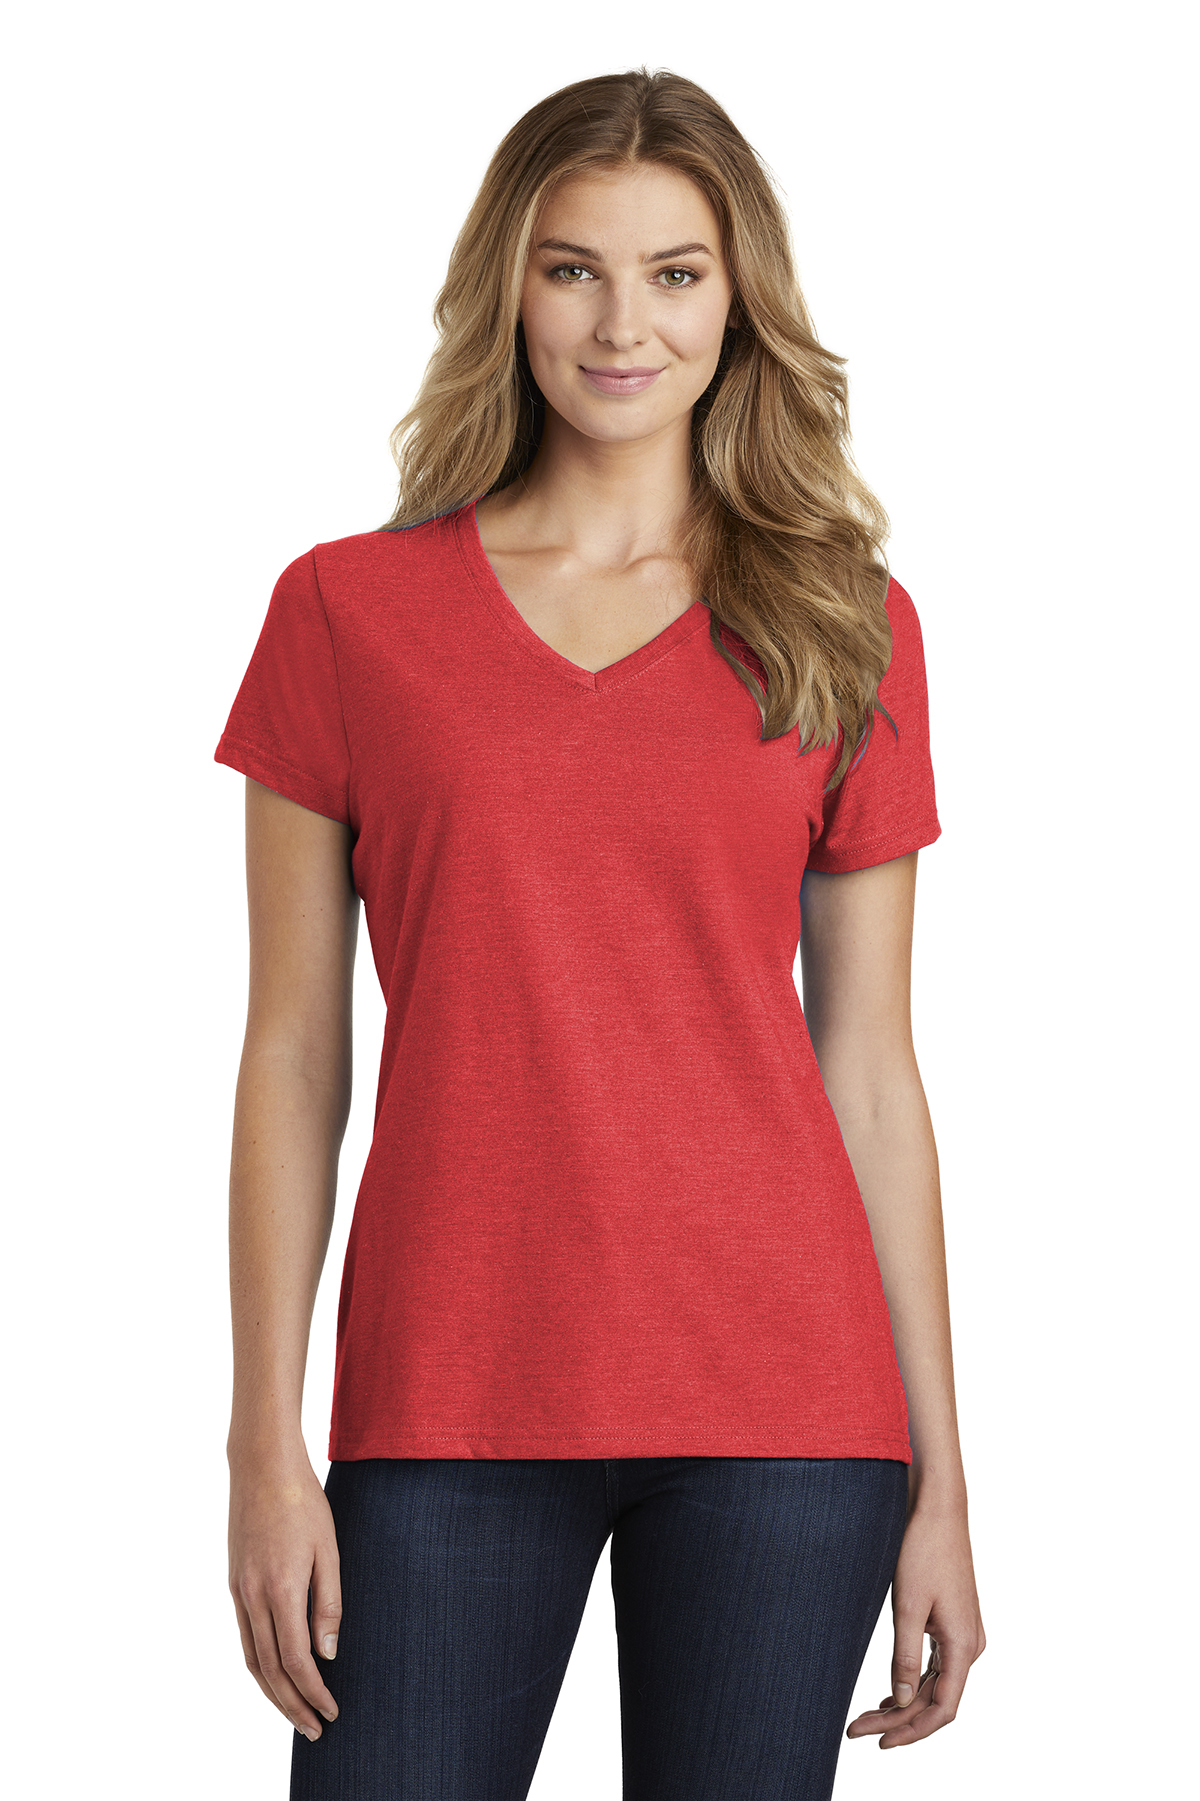 click to view Bright Red Heather